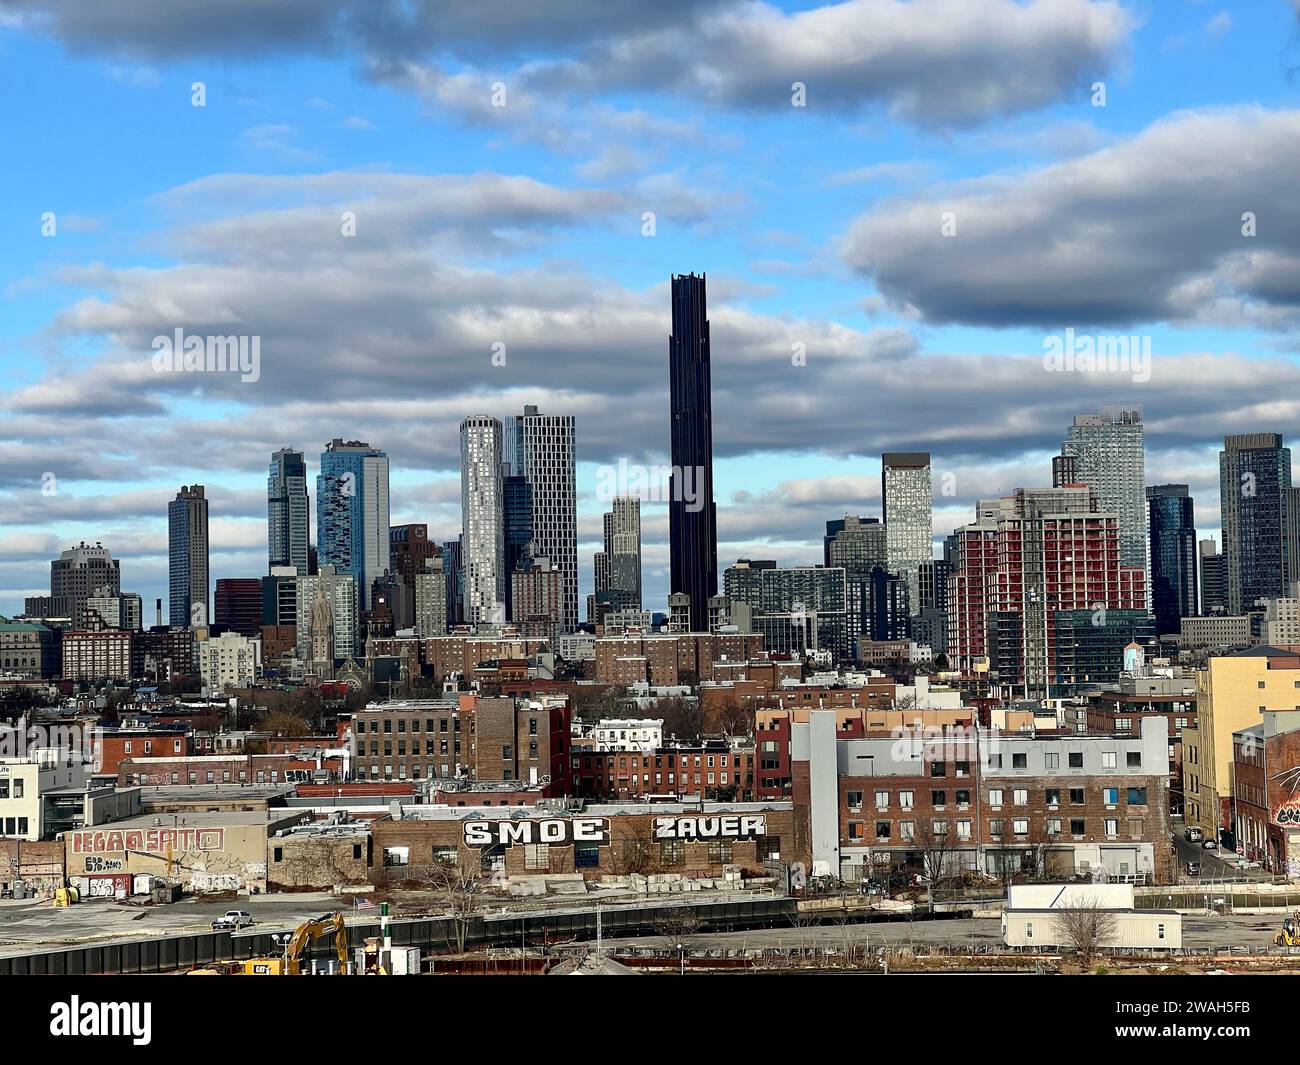 View of the Downtown Brooklyn ever growing skyline from the elevated Smith 9th Street elevated subway Station platform across residential neighborhoods in Brooklyn, New York City. Stock Photo